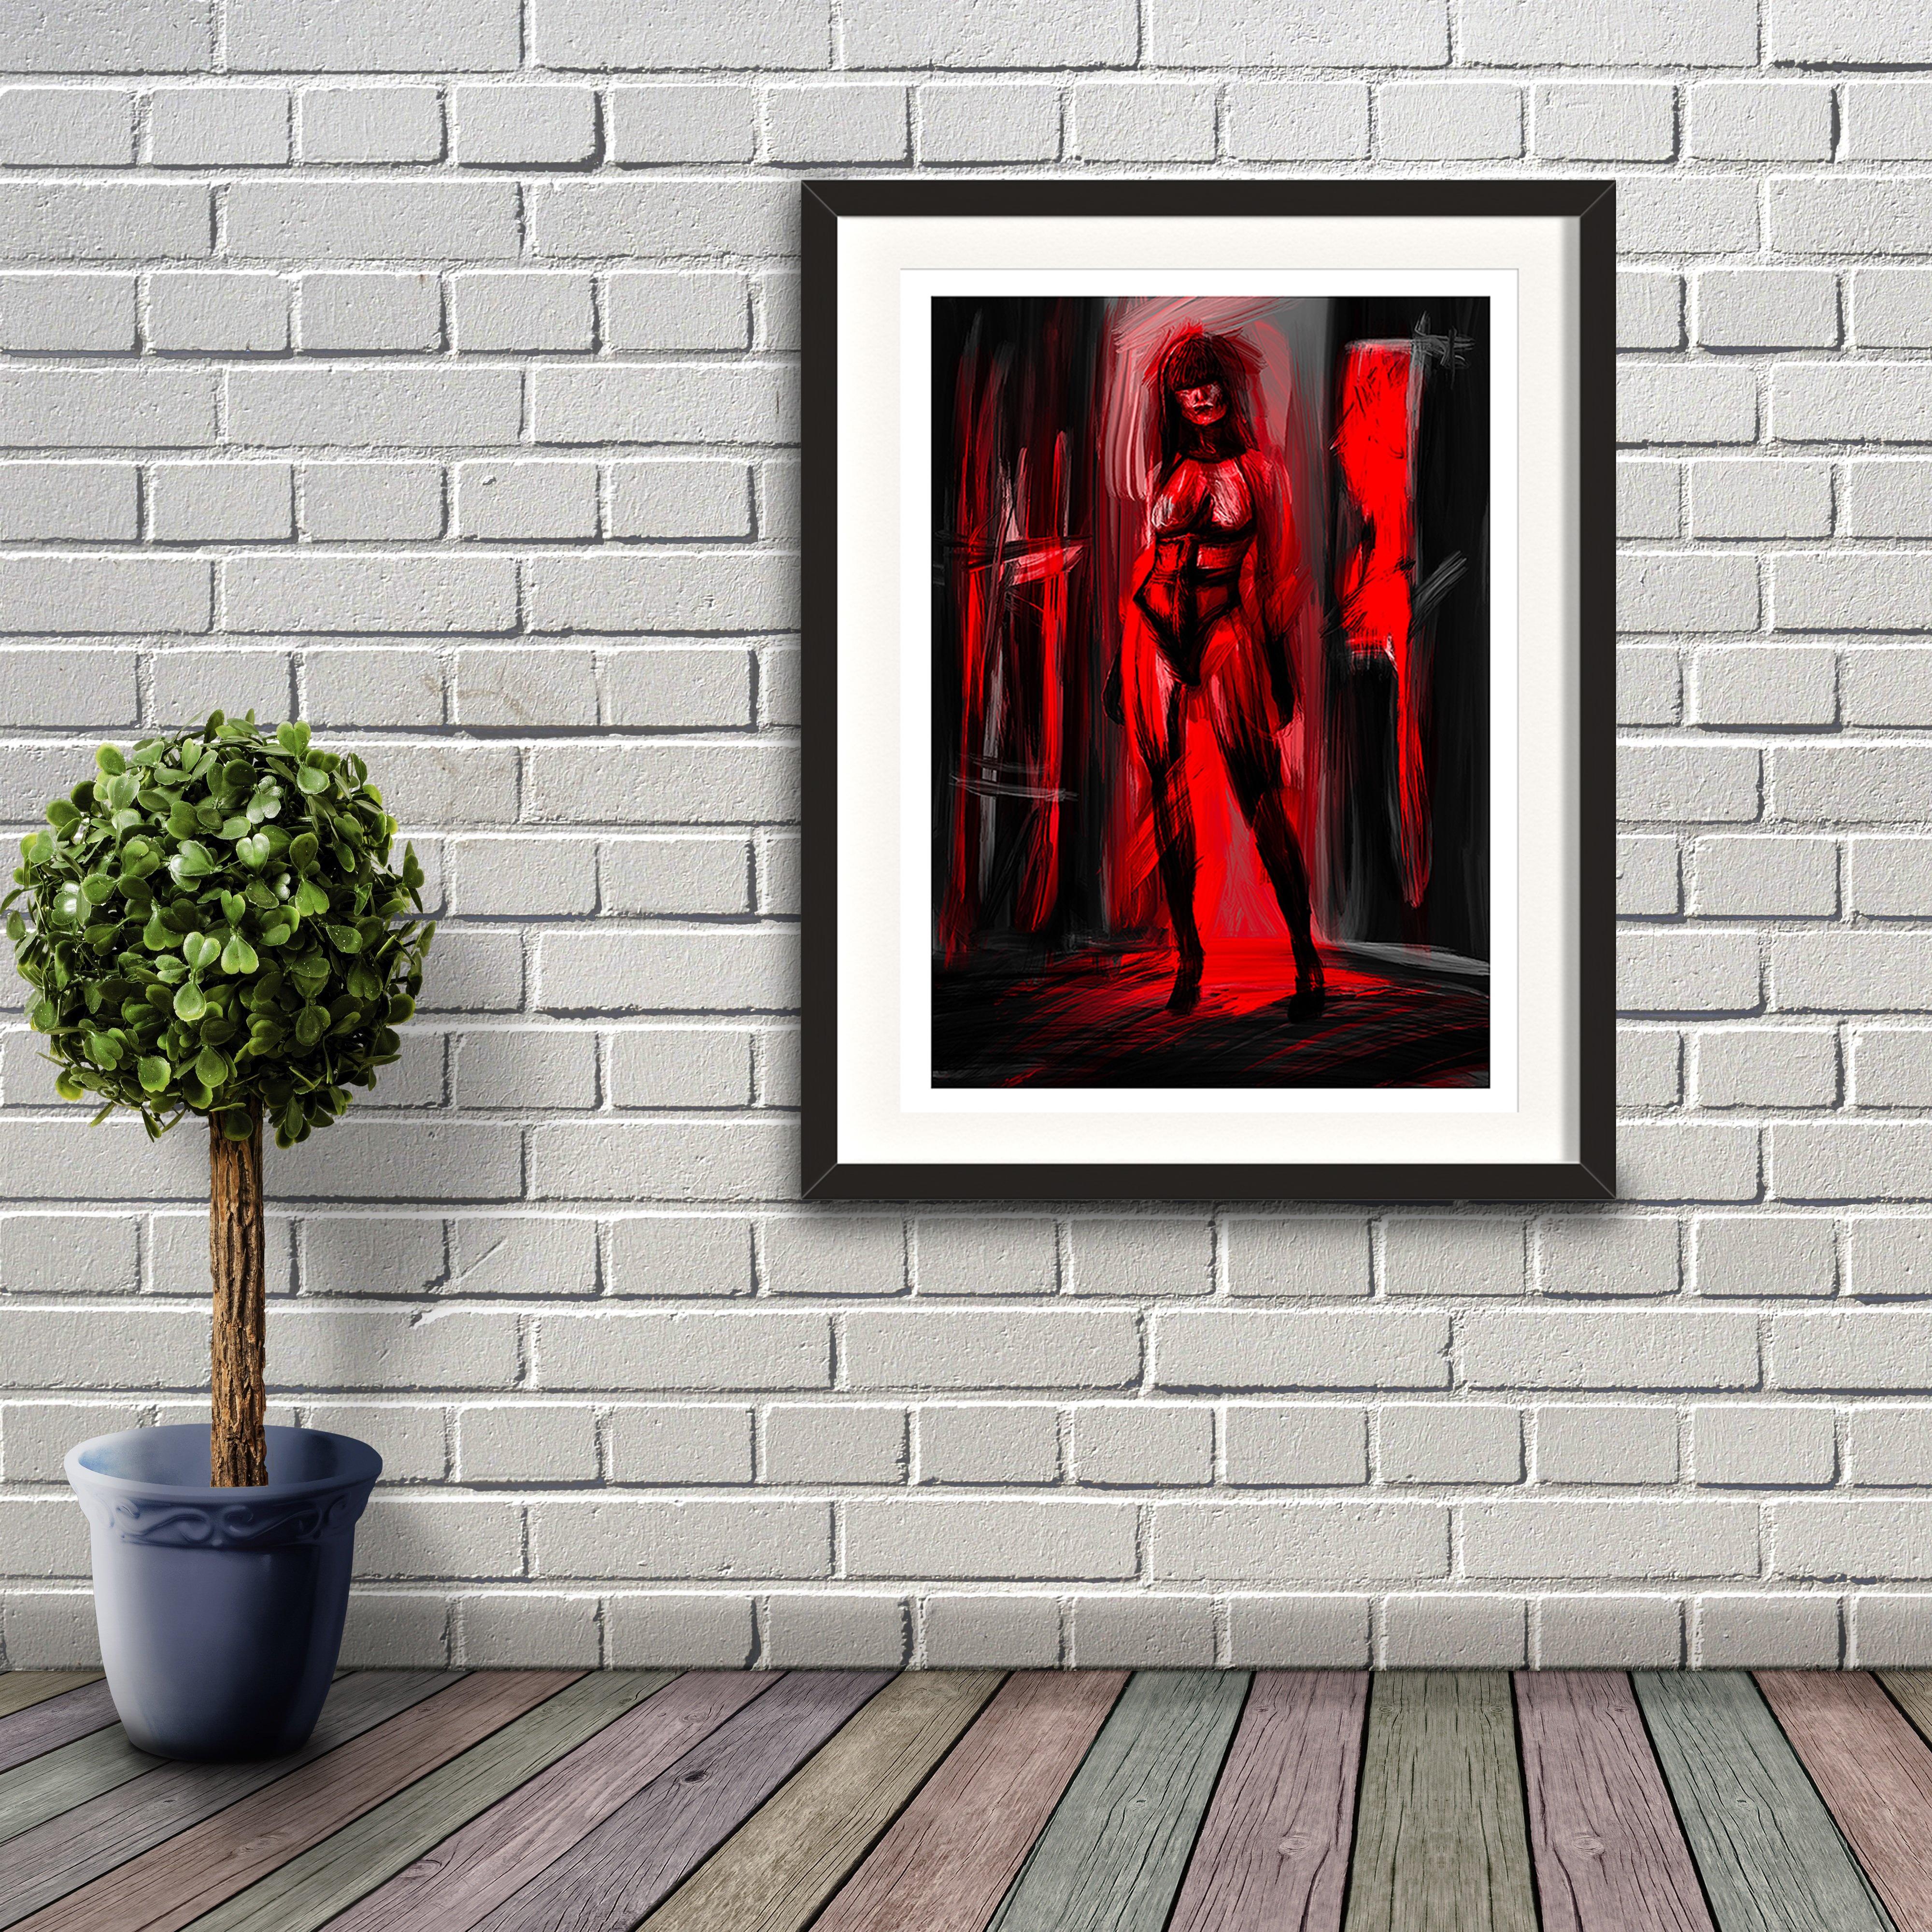 Red & black coloured image by Lily Bourne called Inner Silhouette showing an erotic lady standing in a doorway. Image depicts a demon of the mind. Artwork shown in a black frame hanging on a brick wall.